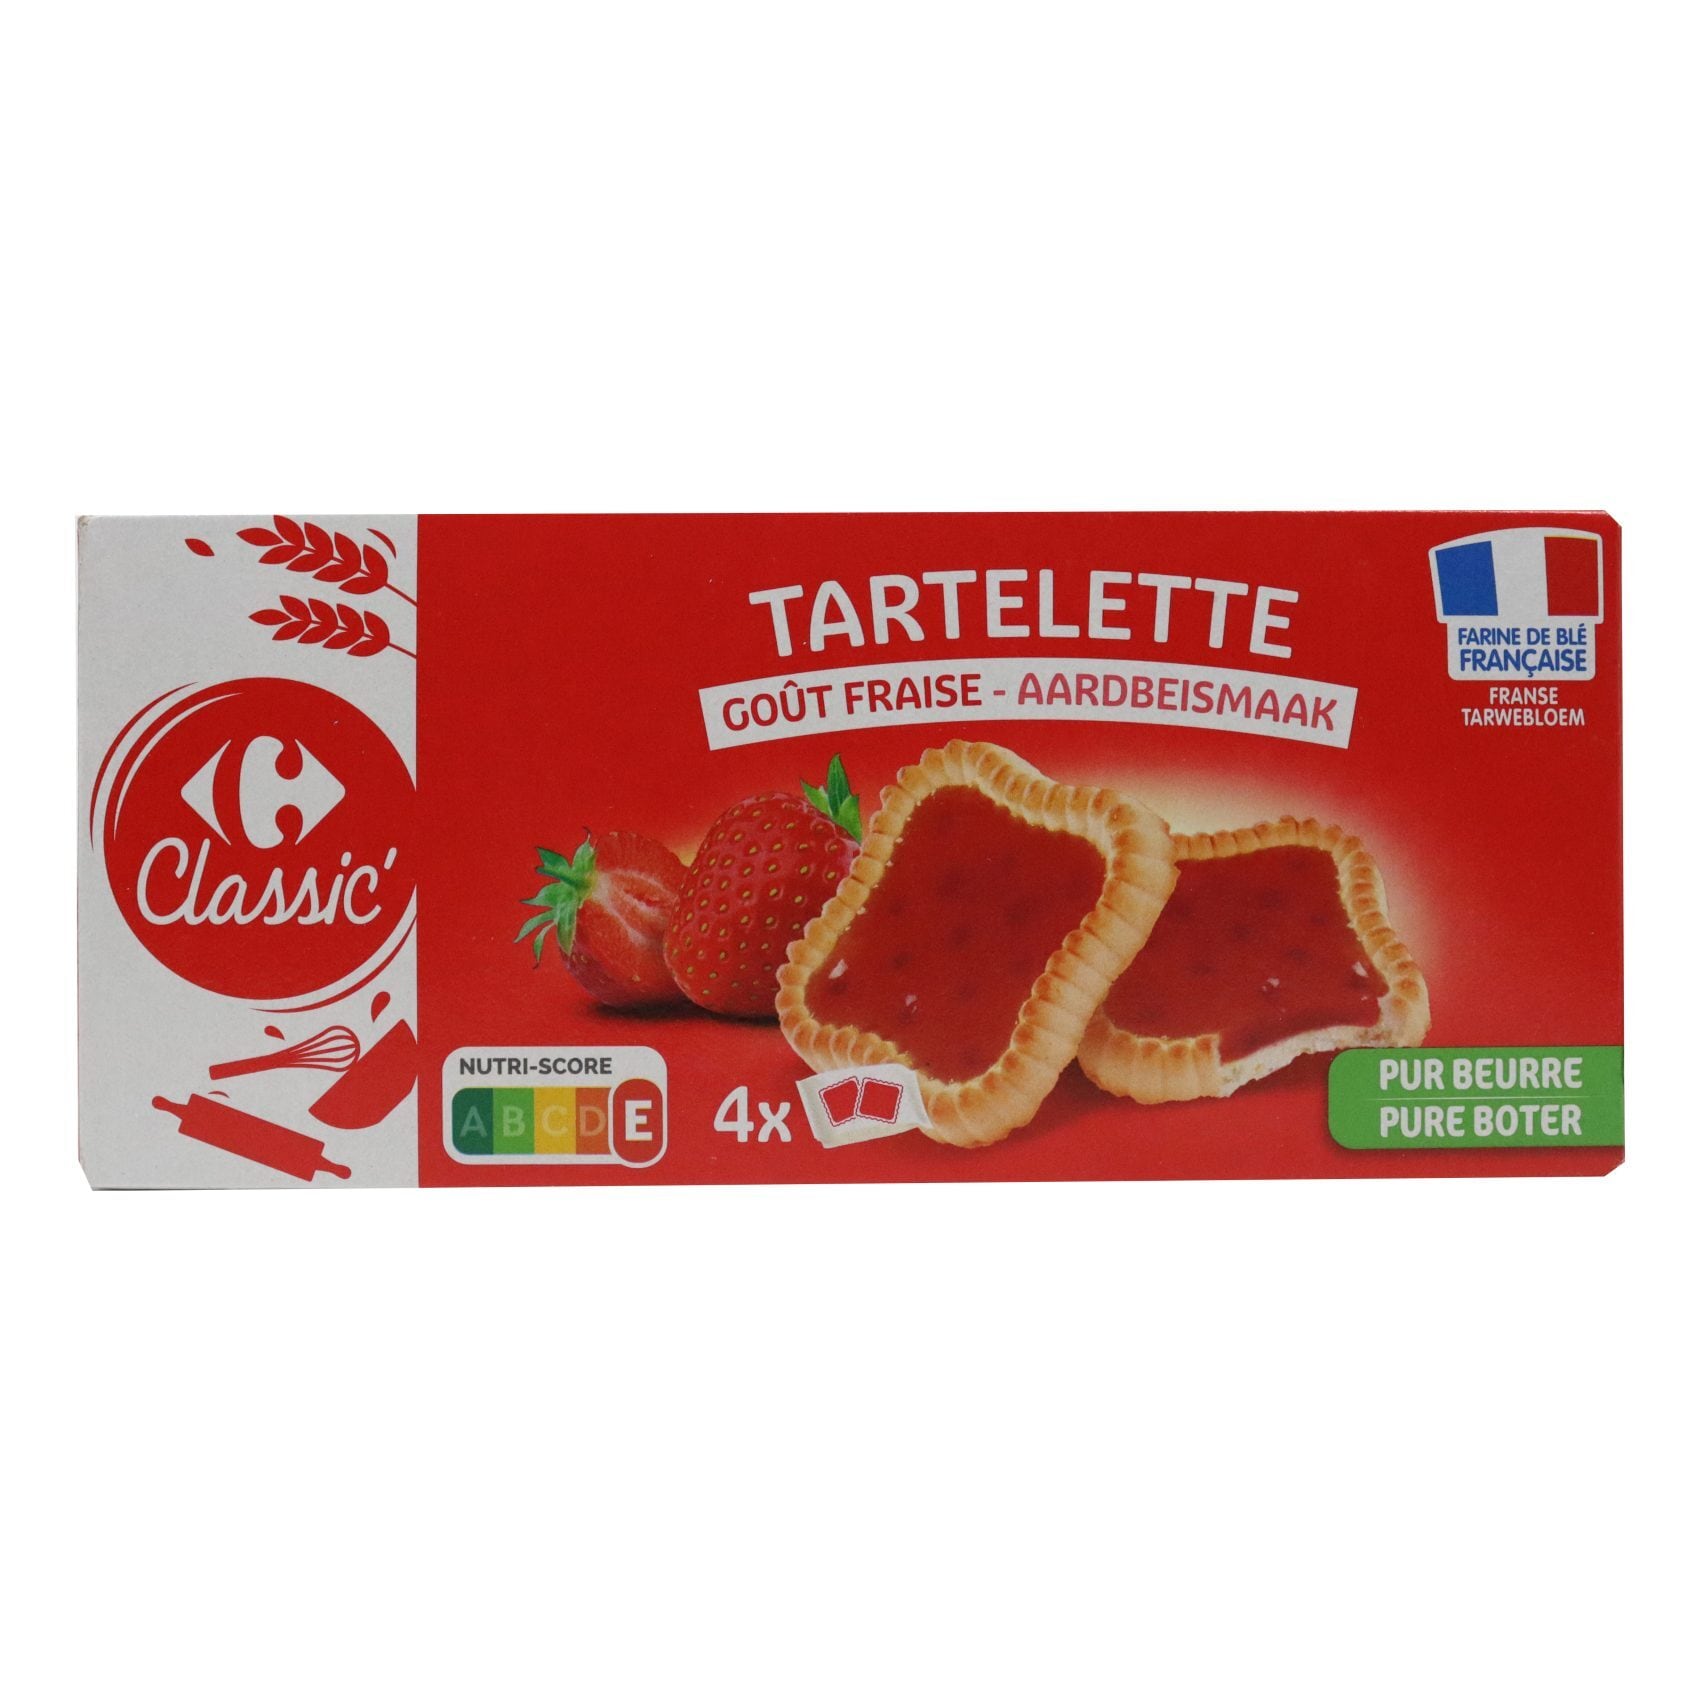 Lu Strawberry Barquette (120g) - Pack of 6